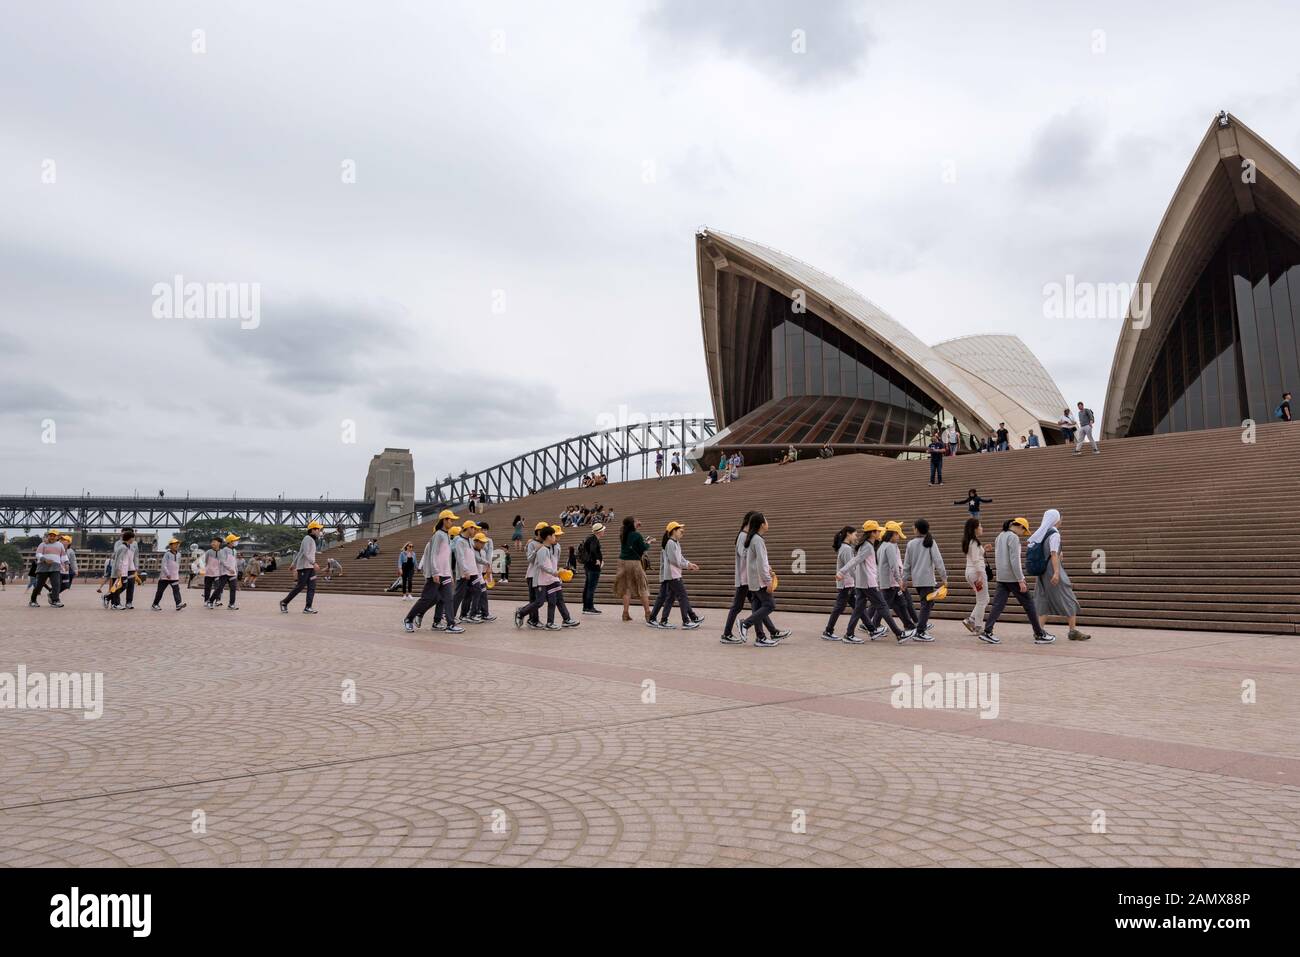 A catholic nun leads a band of young primary school aged Asian children, mostly wearing yellow caps, towards the steps of the Sydney Opera House. Stock Photo